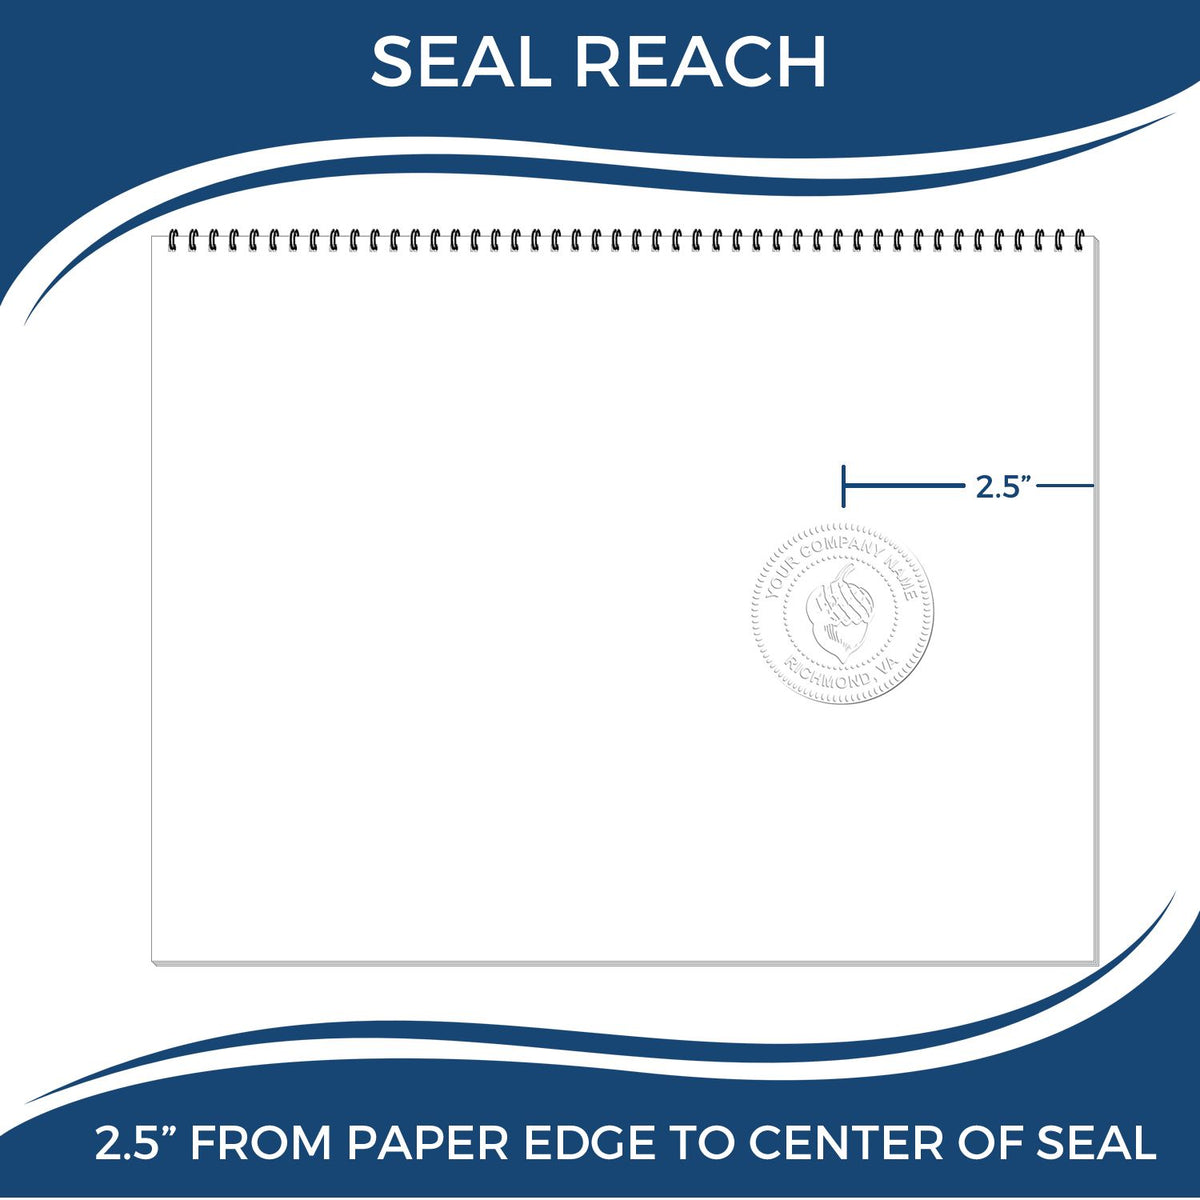 An infographic showing the seal reach which is represented by a ruler and a miniature seal image of the Long Reach Arizona PE Seal